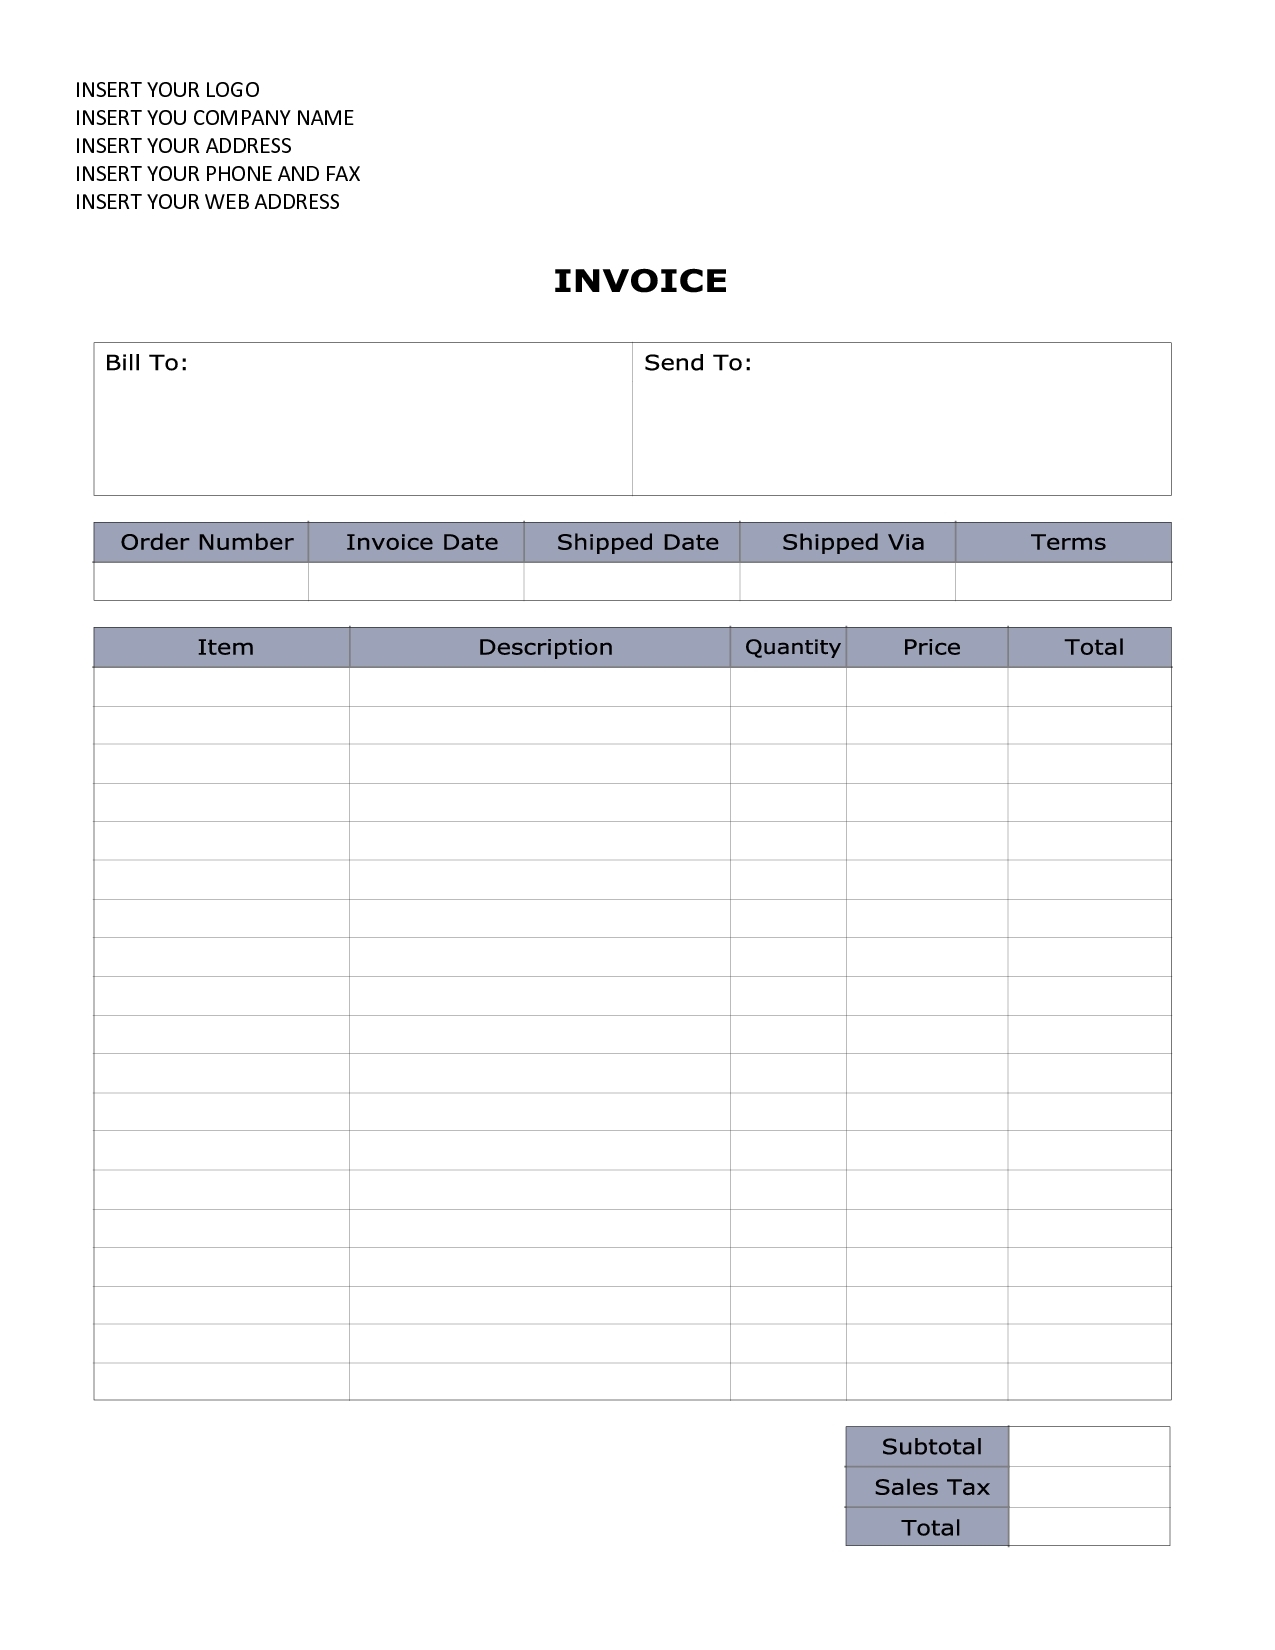 invoice template word invoice template free 2016 invoice example word